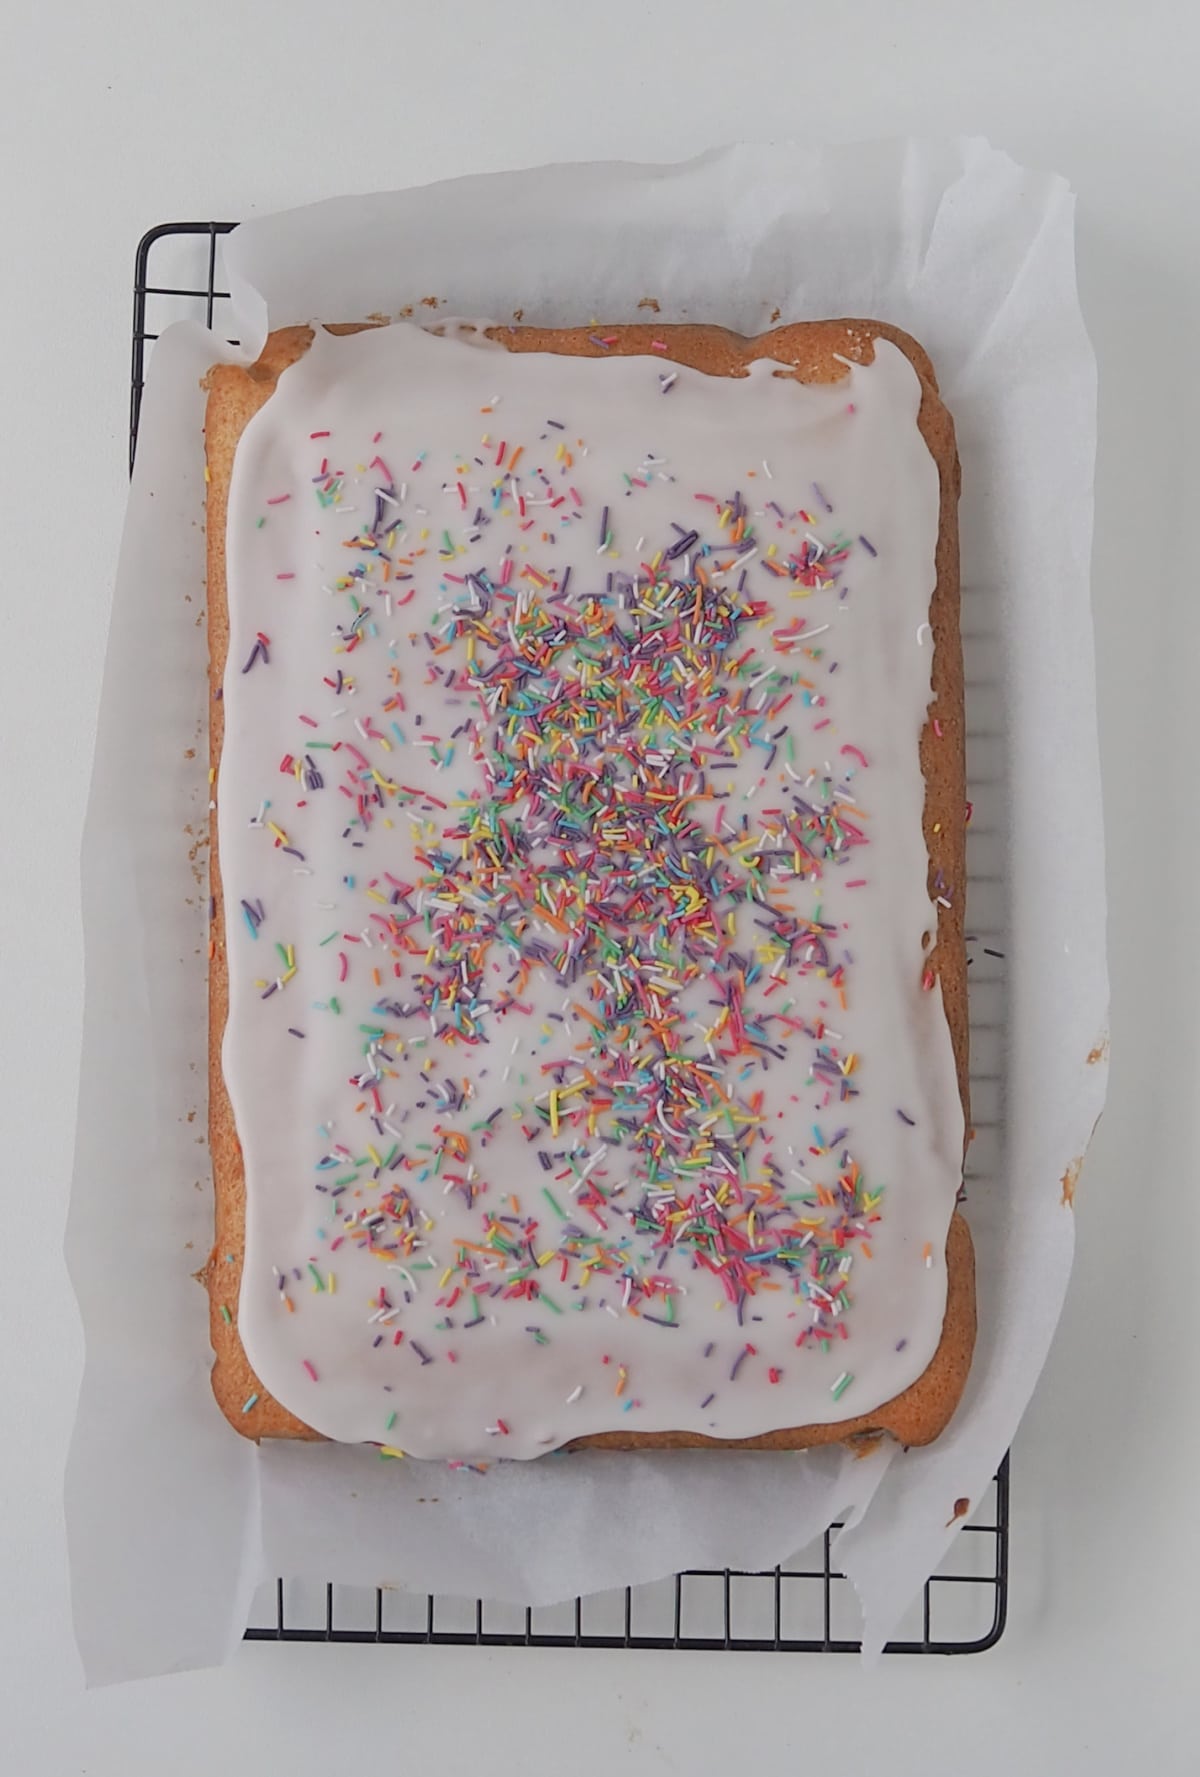 Overhead view of Vanilla Sheet Cake iced with a white frosting and decorated with sprinkles sitting on a sheet of baking paper on a wire rack.